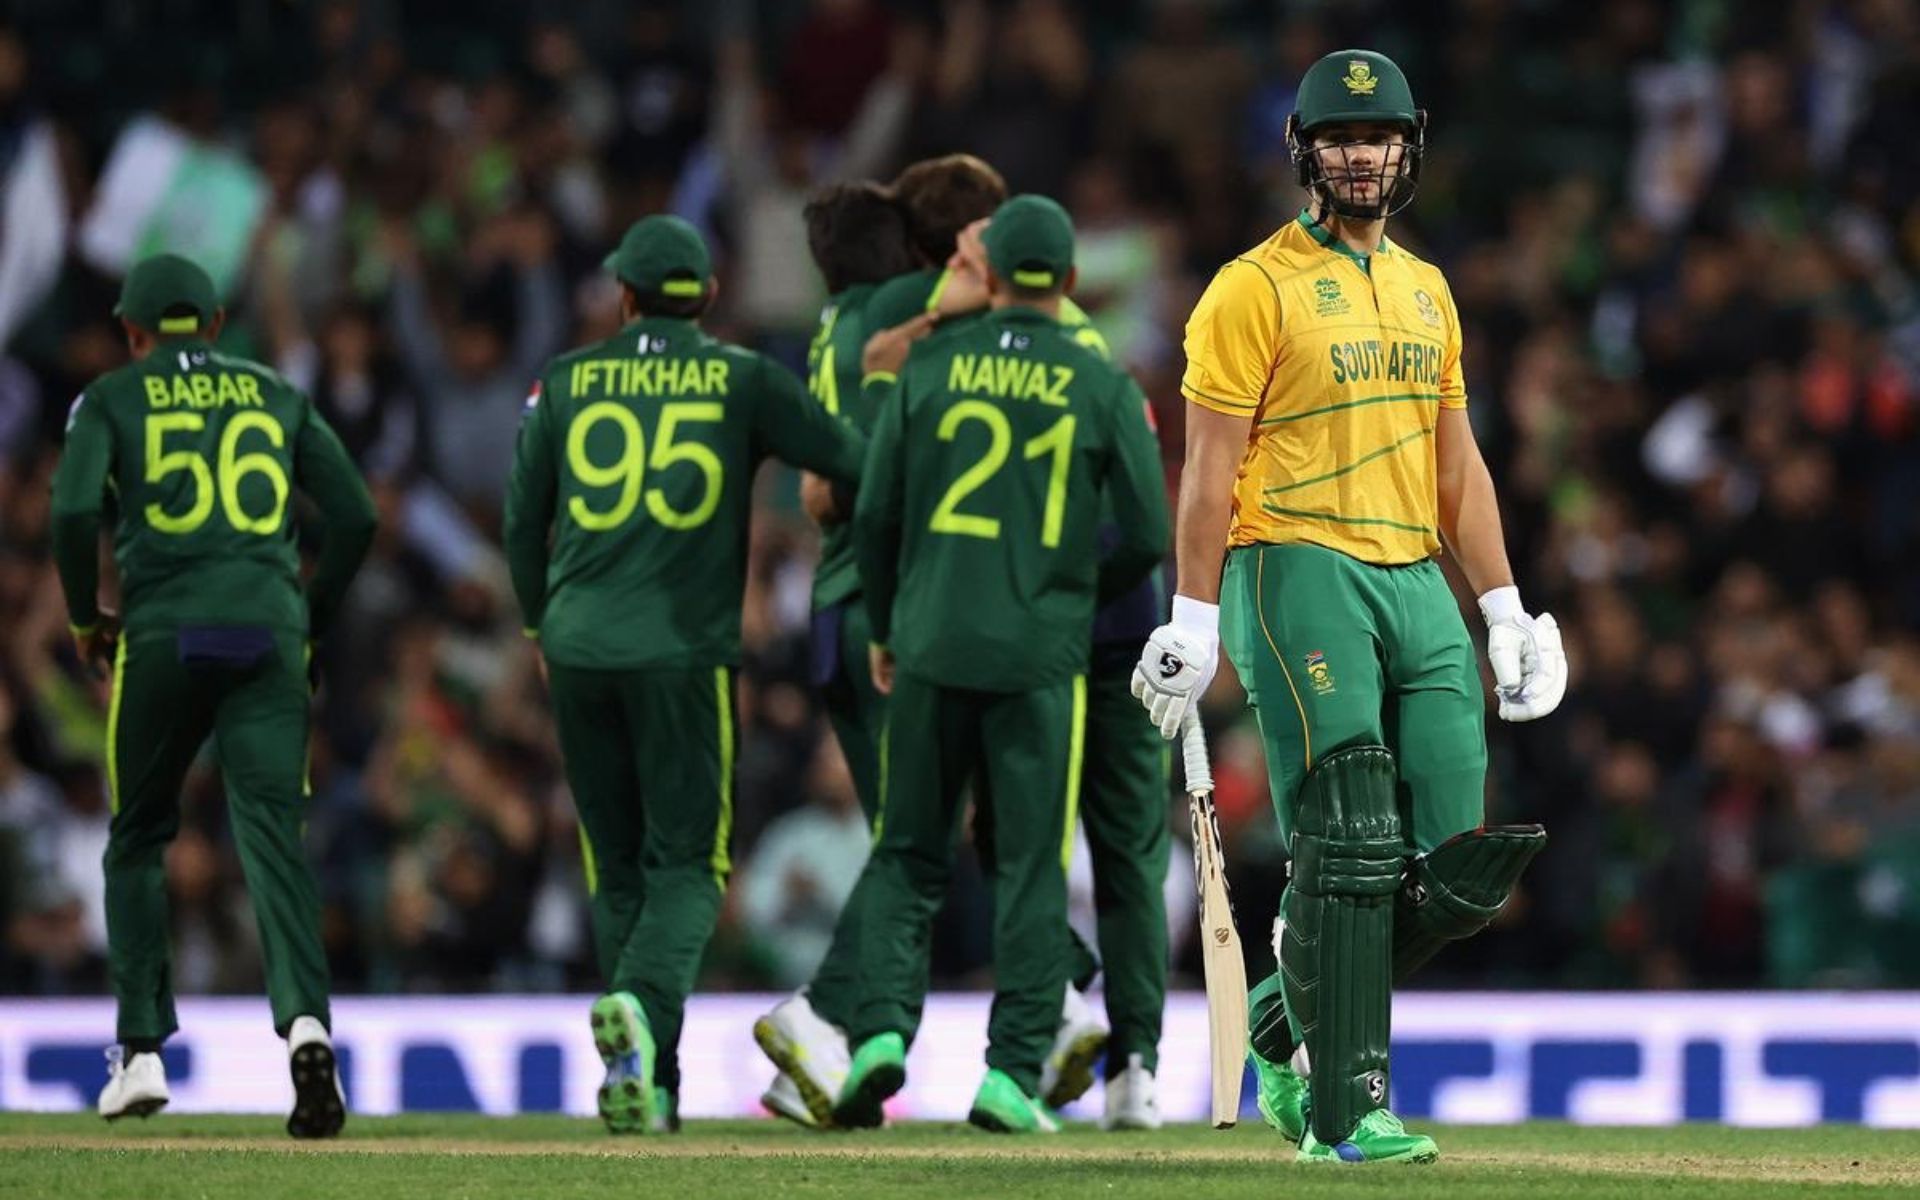 Pakistan To Tour South Africa For 3 T20s, 3 ODIs & 2 Tests In December-January